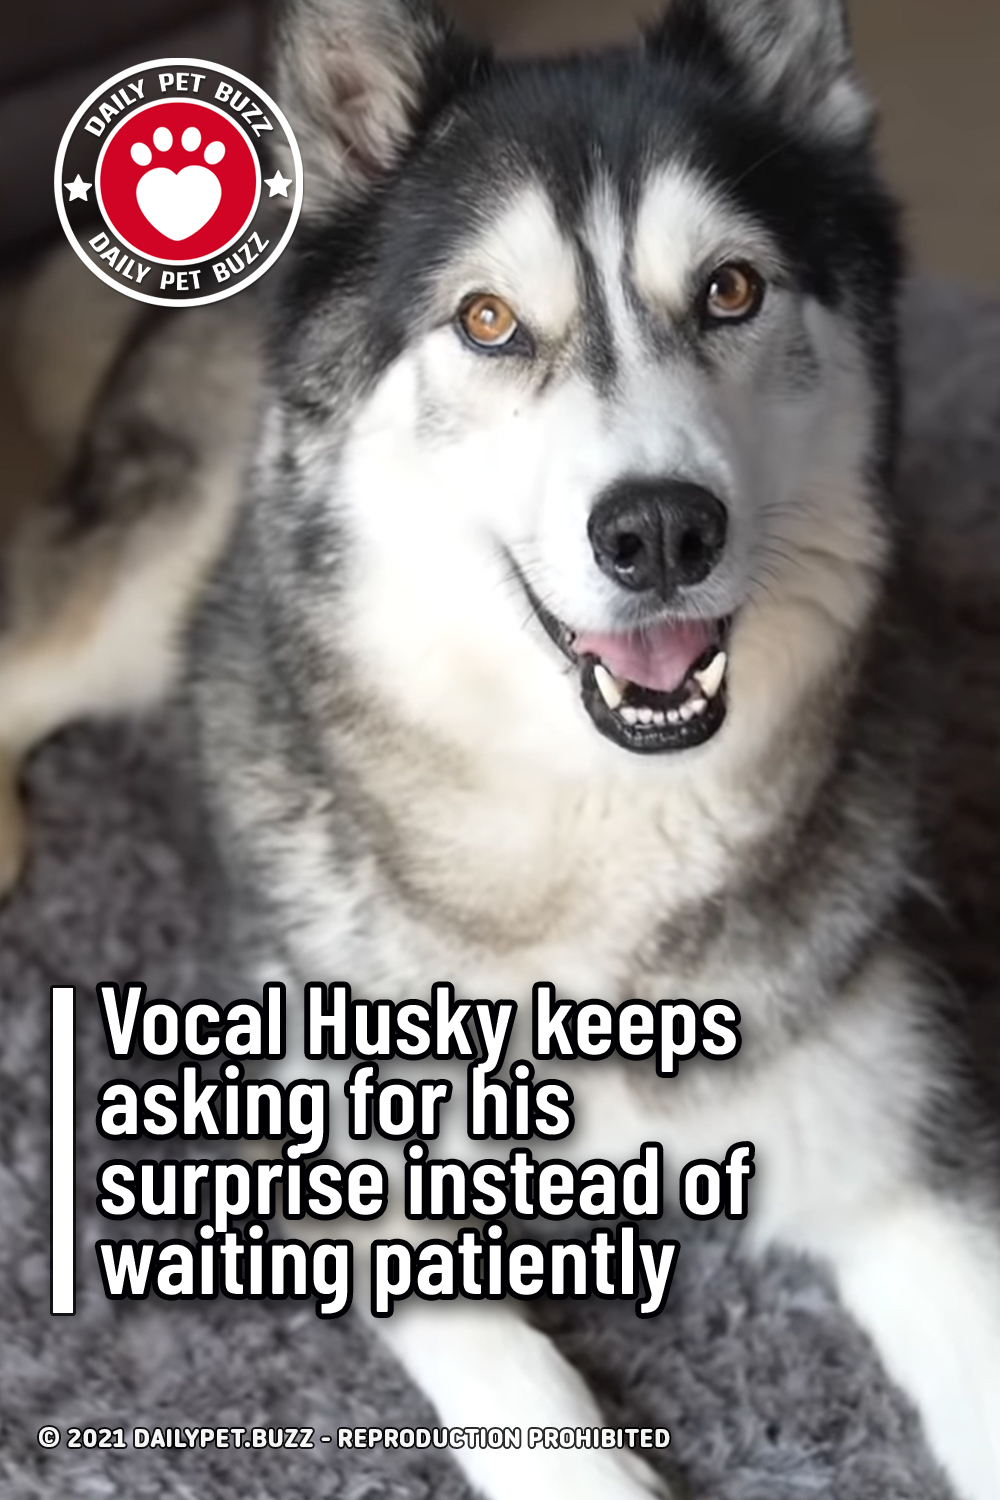 Vocal Husky keeps asking for his surprise instead of waiting patiently